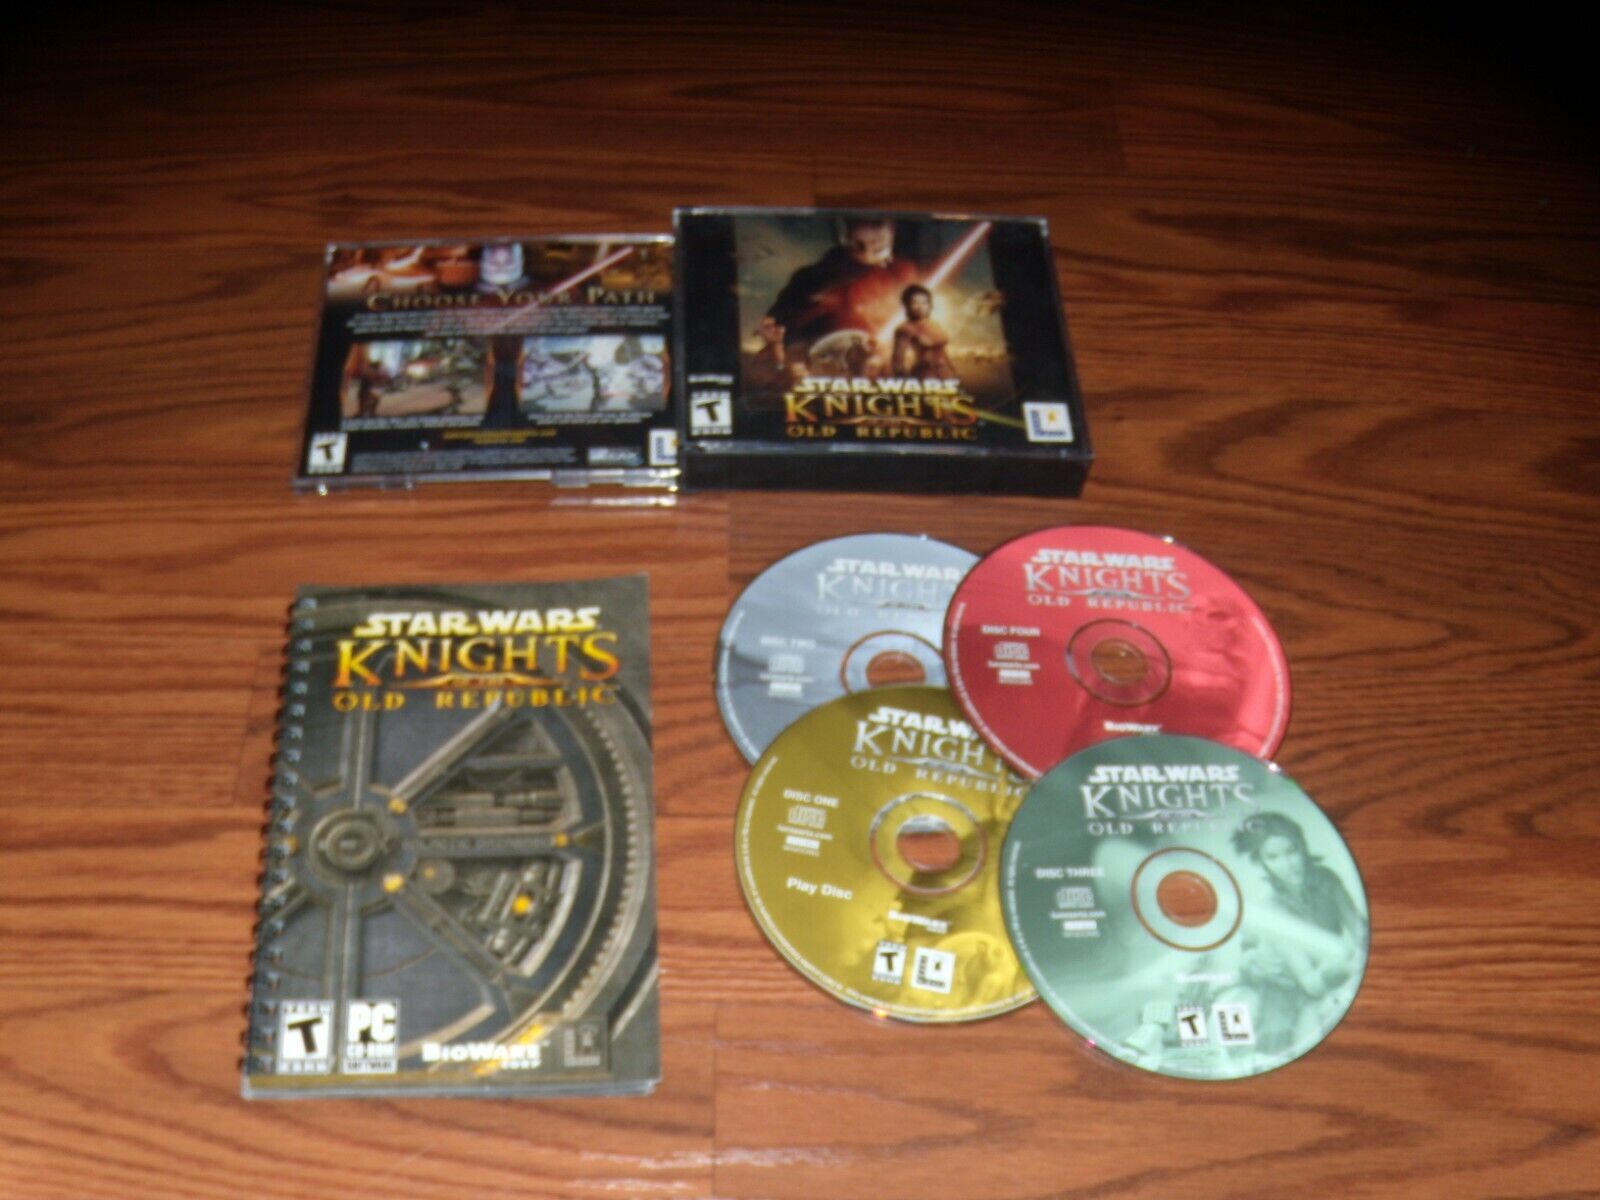 Star Wars Knights of the Old Republic (PC, 2003) Game CD-ROM with manual